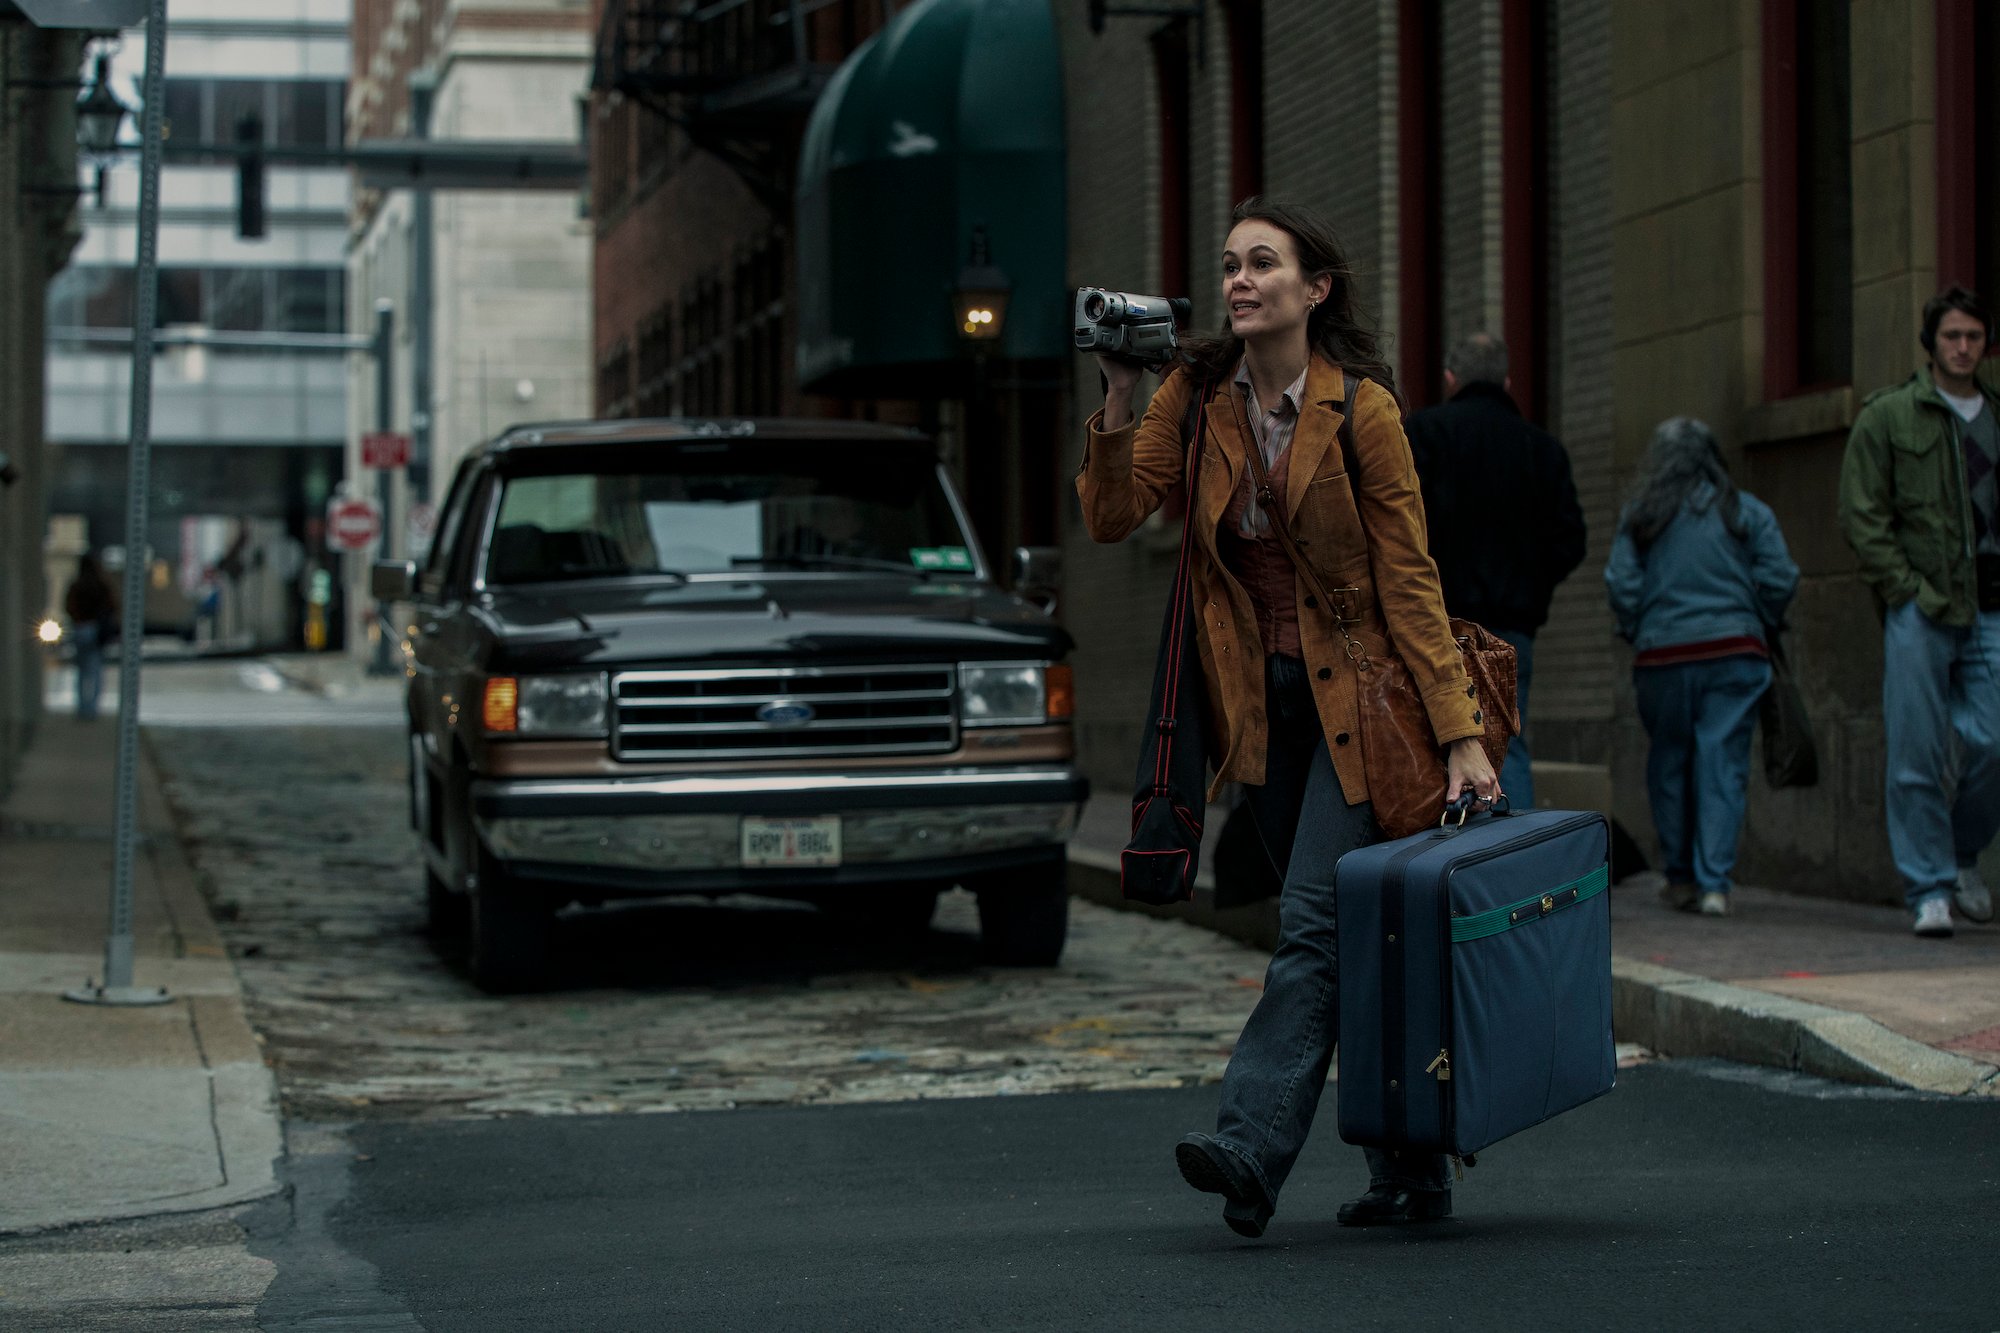 'Archive 81' makeup artist Etzel Ecleston used subtle looks to hint to viewers Melody Pendras moved into The Visser in the '90s. Melody, played by Dina Shihabi, is seen here holding a suitcase and a camera as she walks across the street.